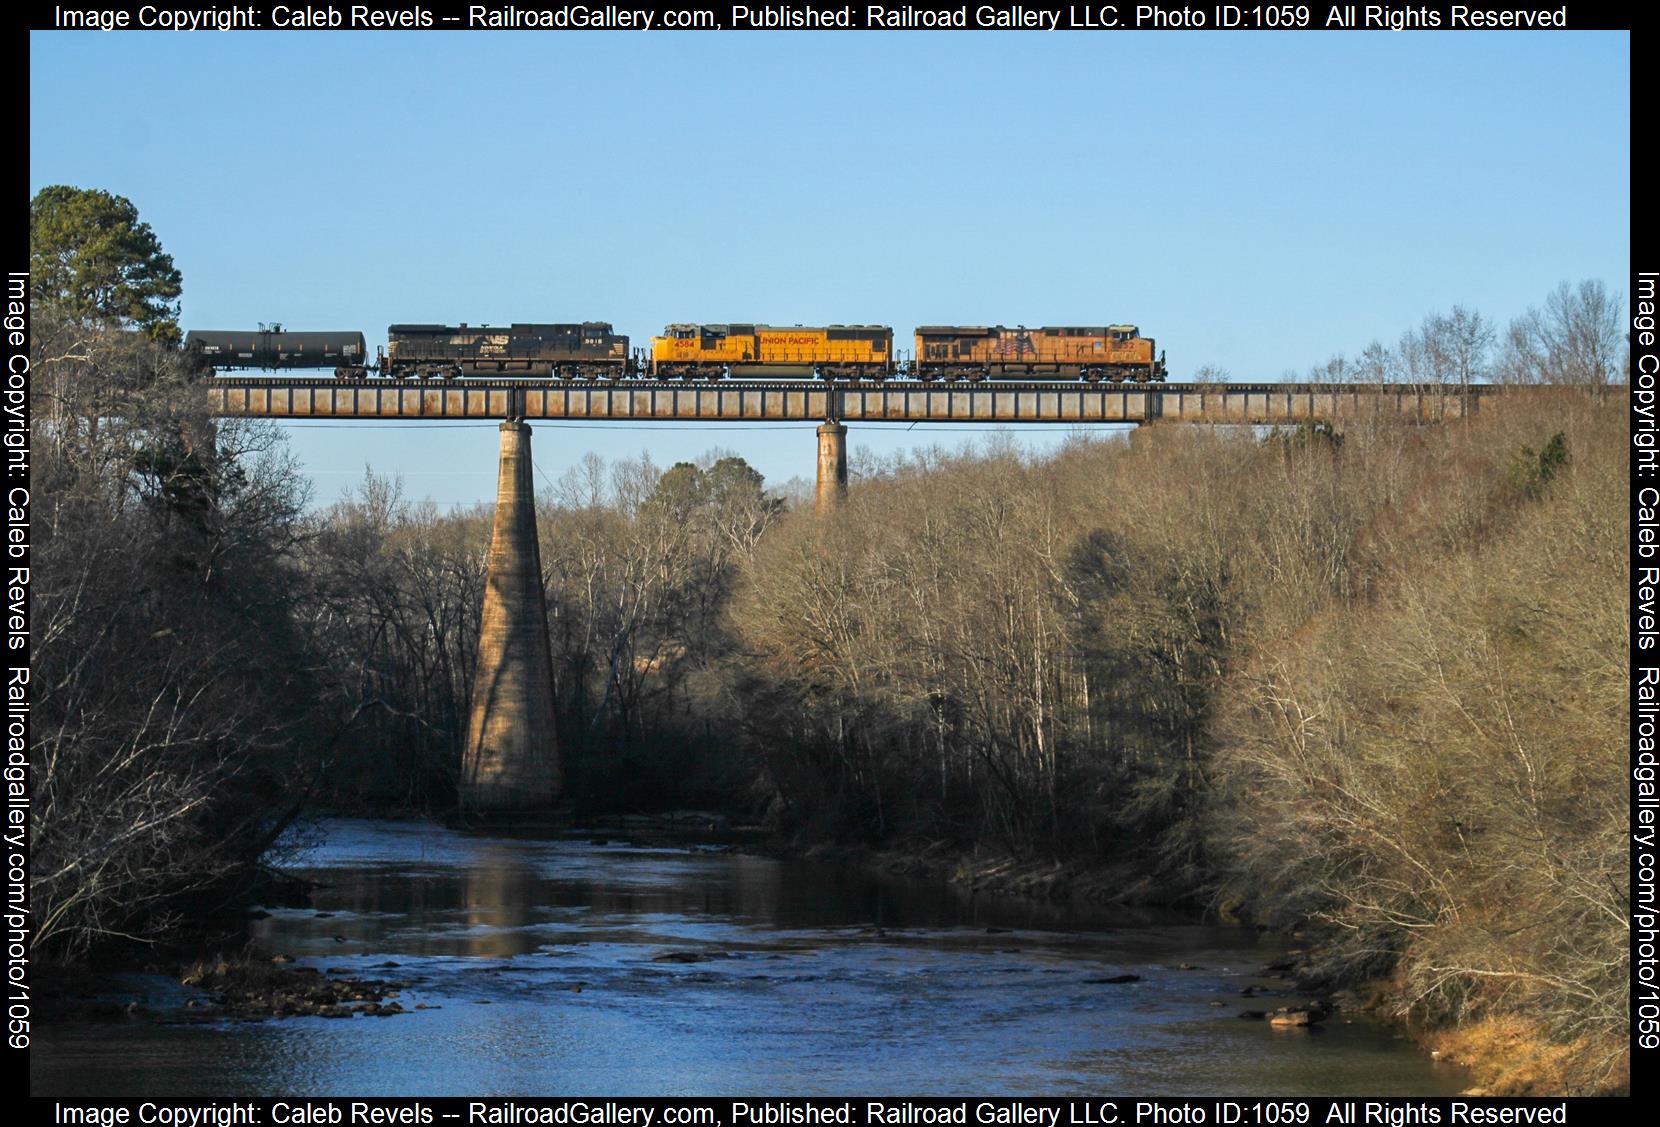 UP 5252 is a class GE C45ACCTE and  is pictured in Converse, South Carolina, USA.  This was taken along the Norfolk Southern Charlotte District  on the Norfolk Southern. Photo Copyright: Caleb Revels uploaded to Railroad Gallery on 05/11/2023. This photograph of UP 5252 was taken on Tuesday, December 27, 2022. All Rights Reserved. 